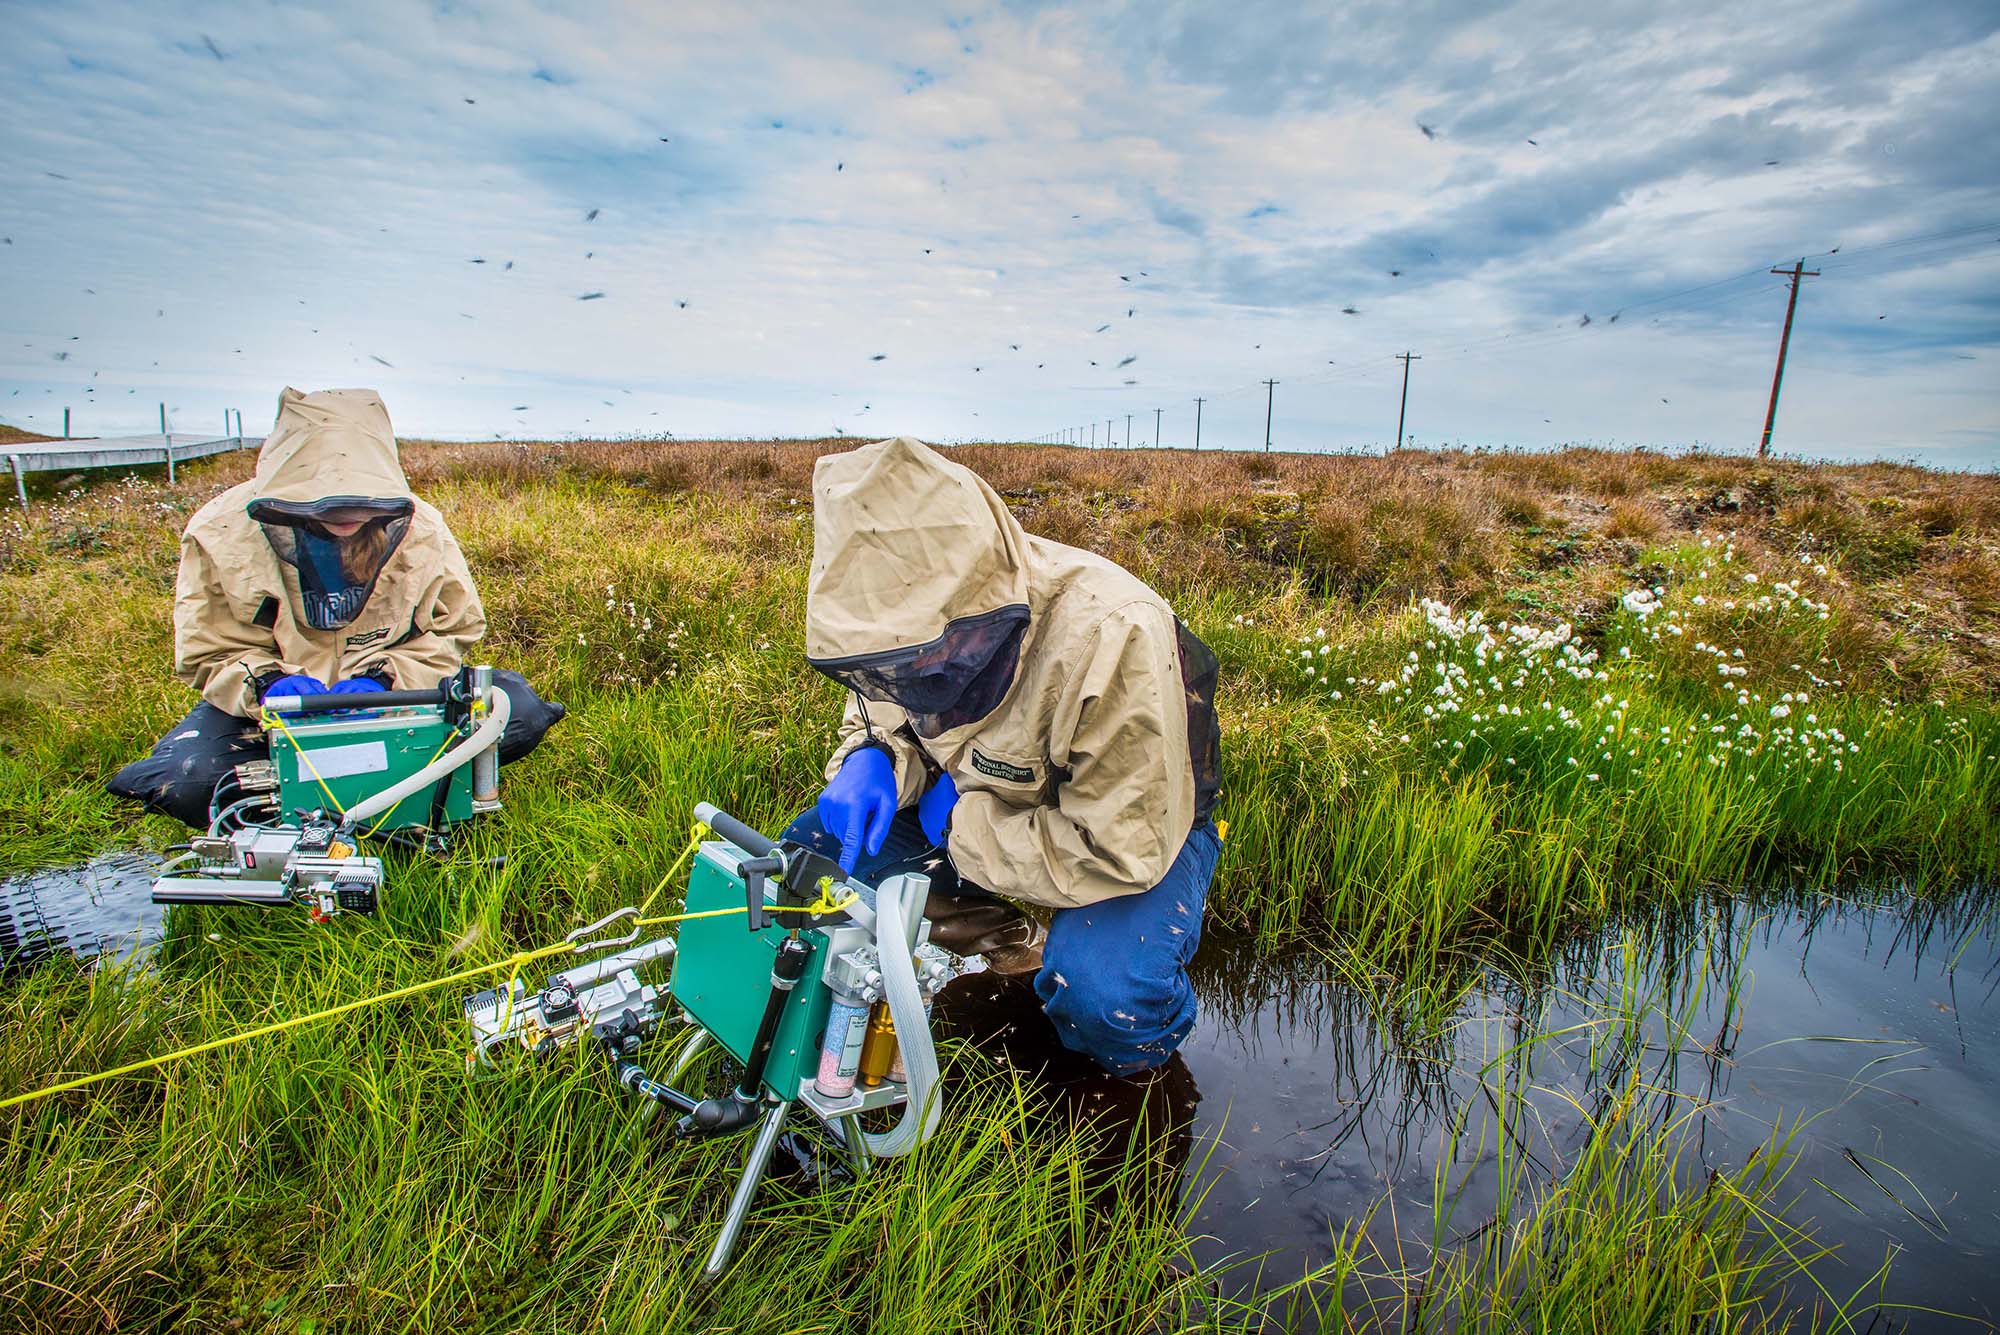 Two researchers in a water-soaked grass field conducting an experiment.